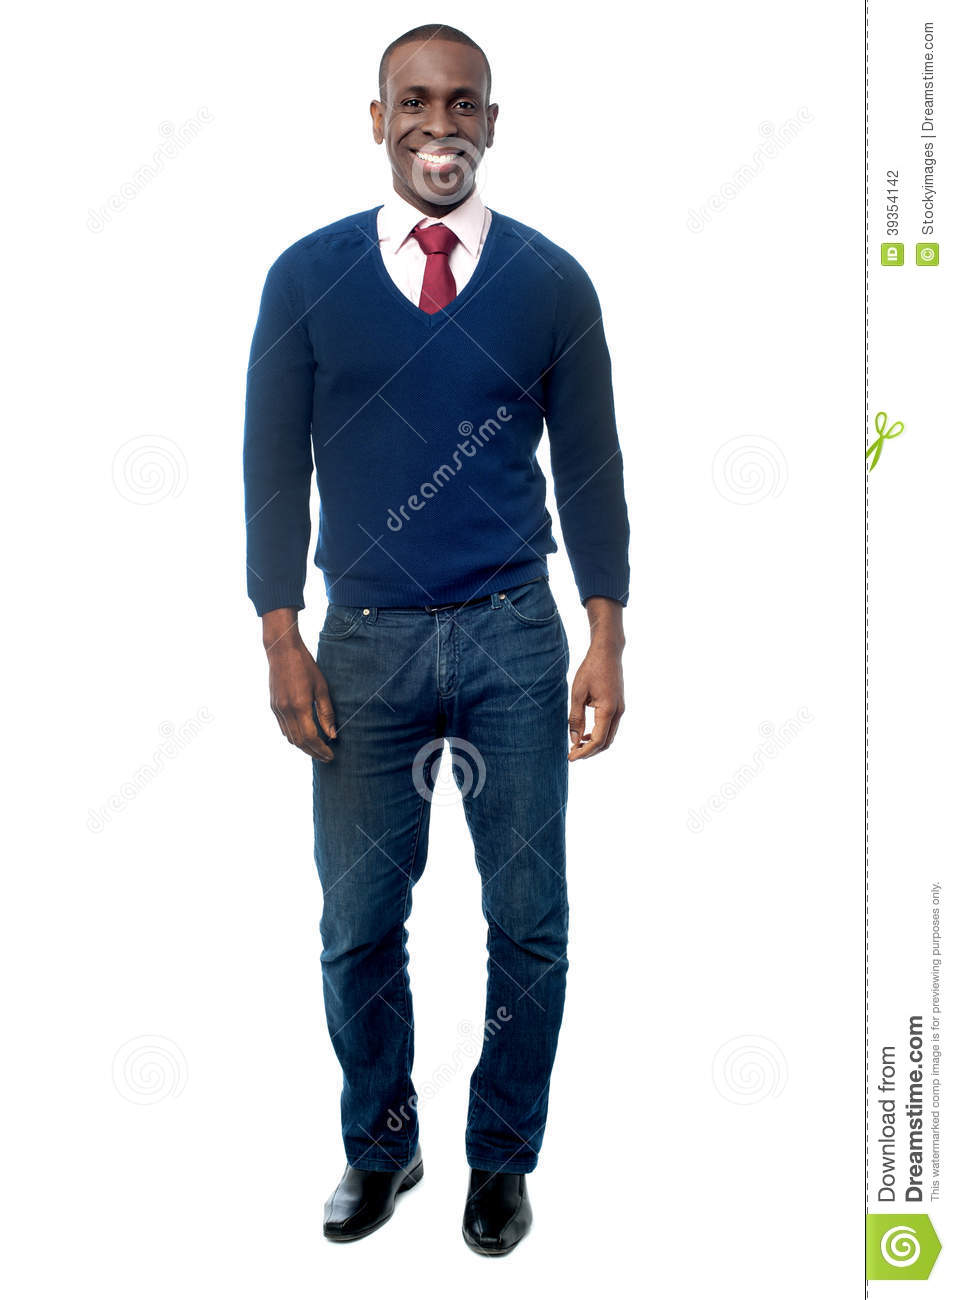     Business Executive In Casual Attire Stock Photo   Image  39354142